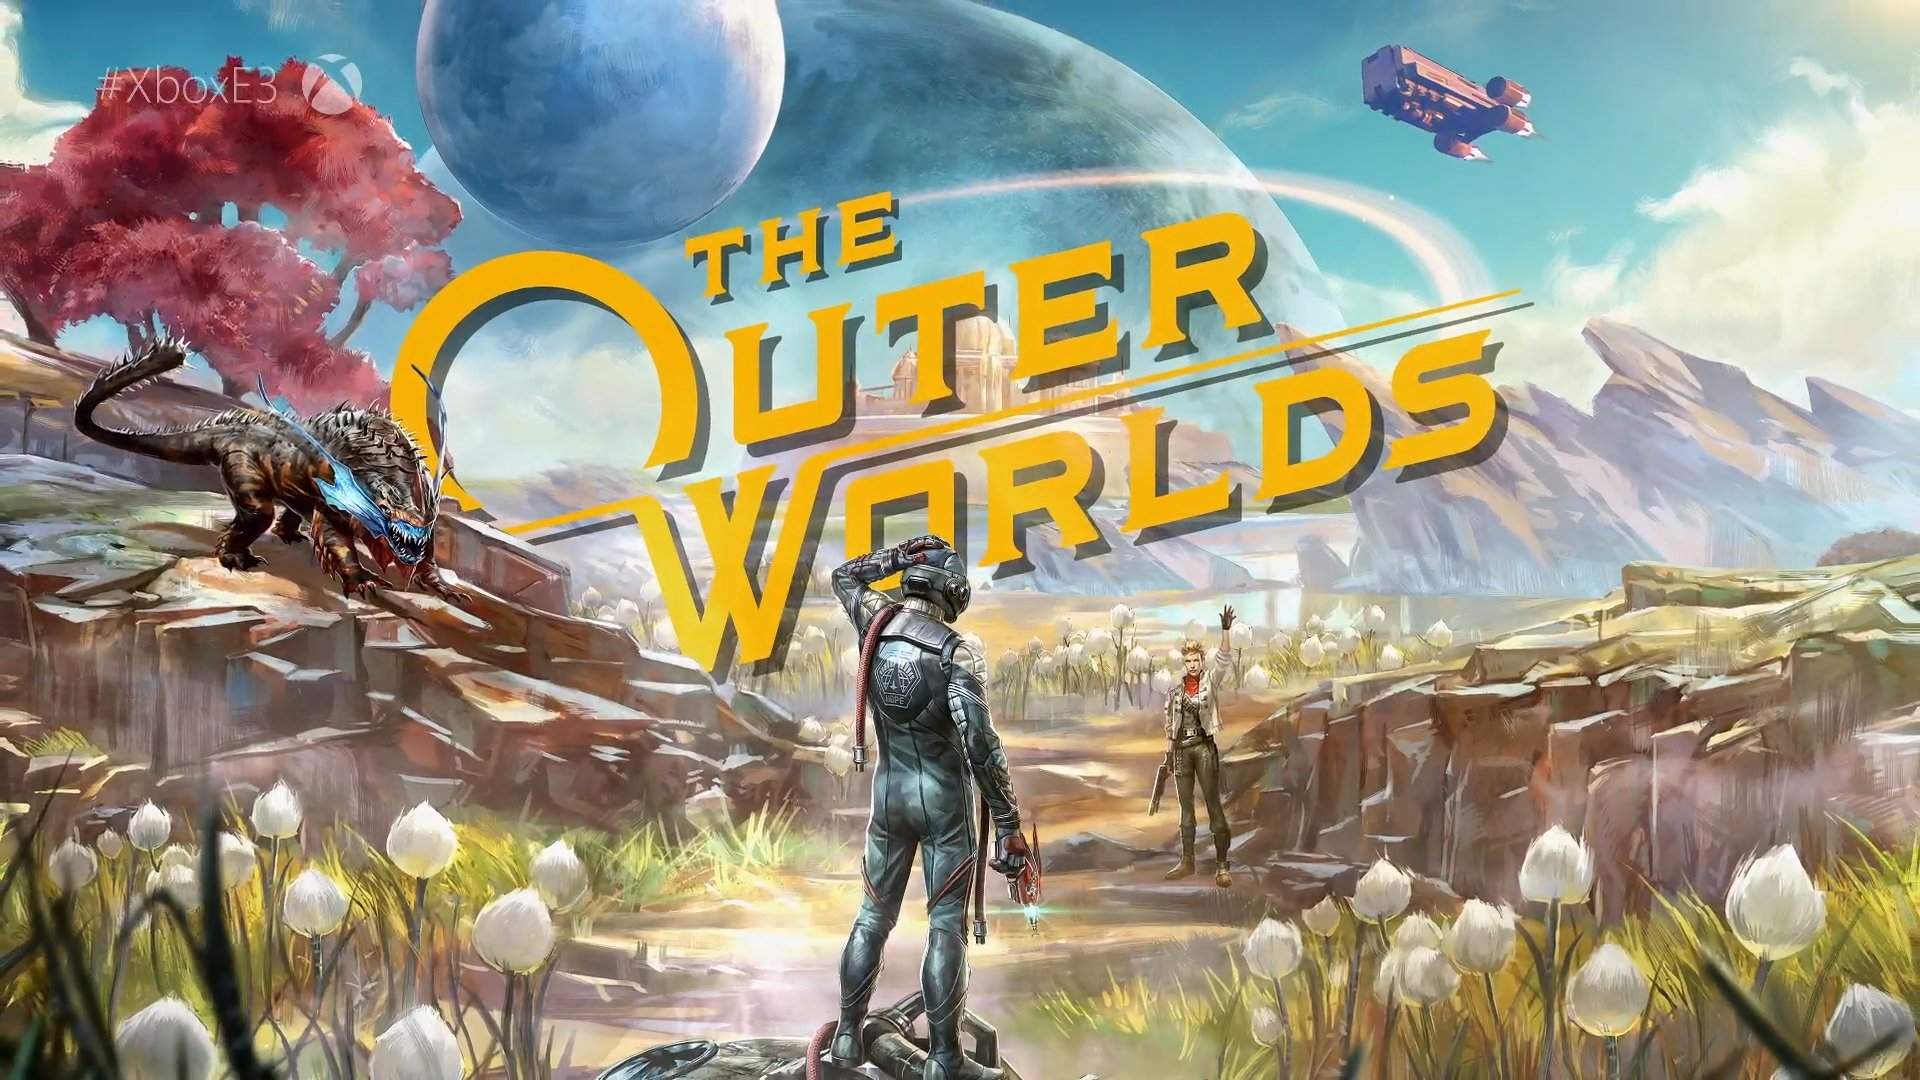 The Outer Worlds Release Date, E3 2019 Gameplay